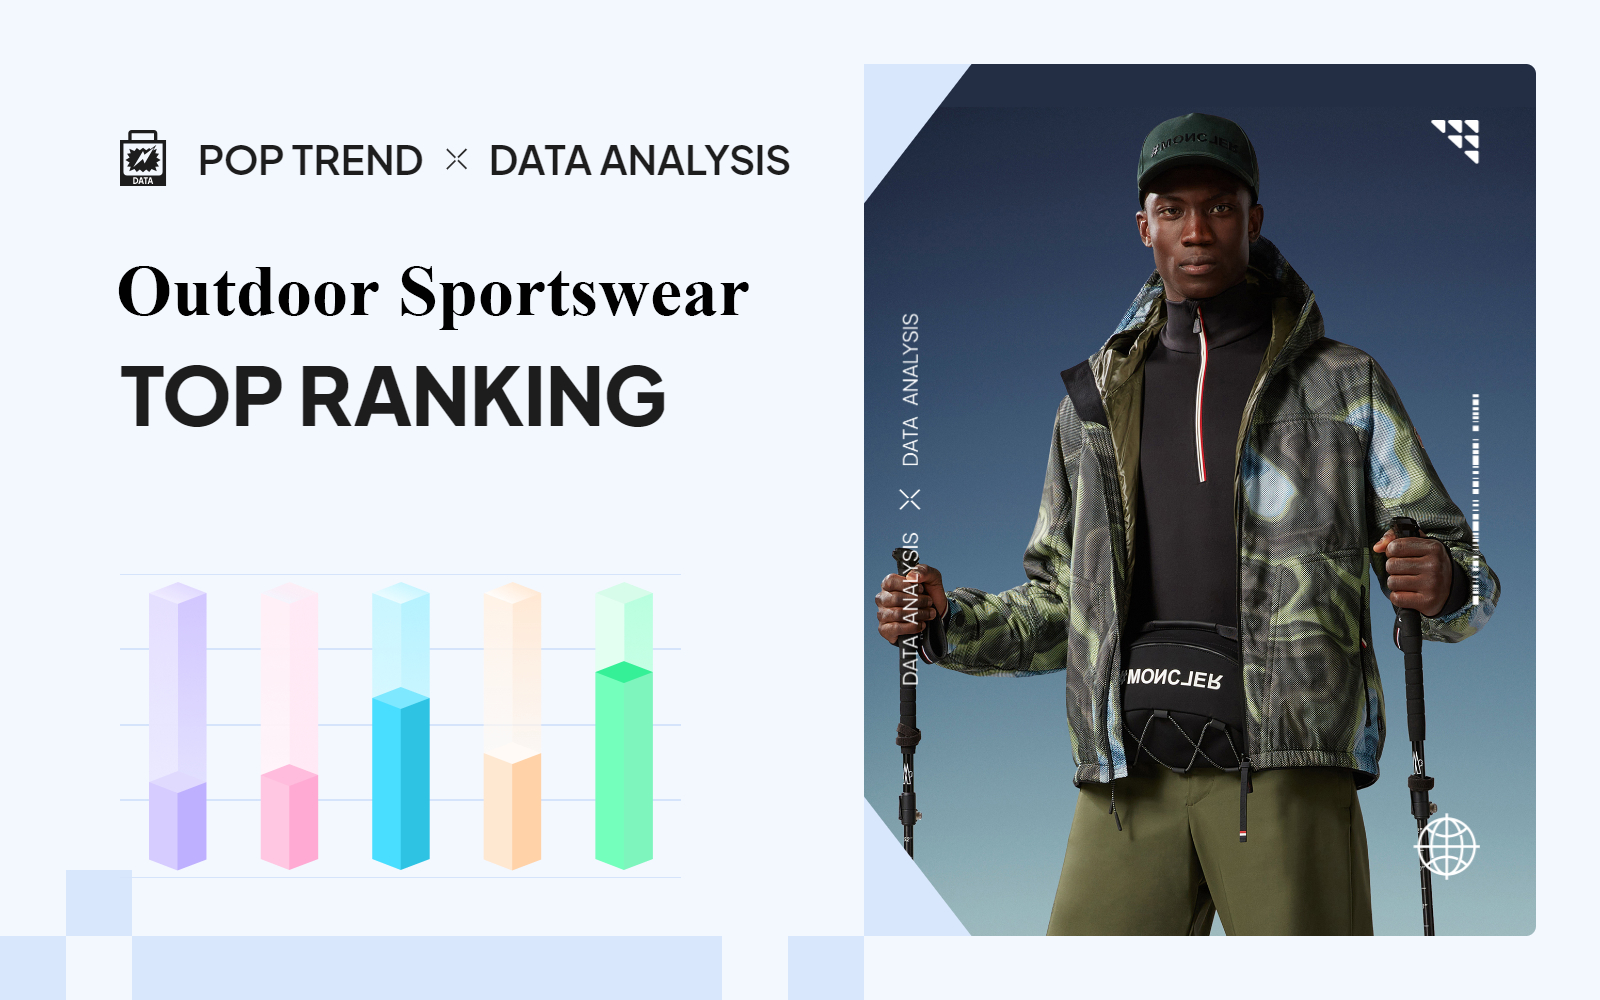 August 2023 -- The TOP Ranking of Outdoor Sportswear